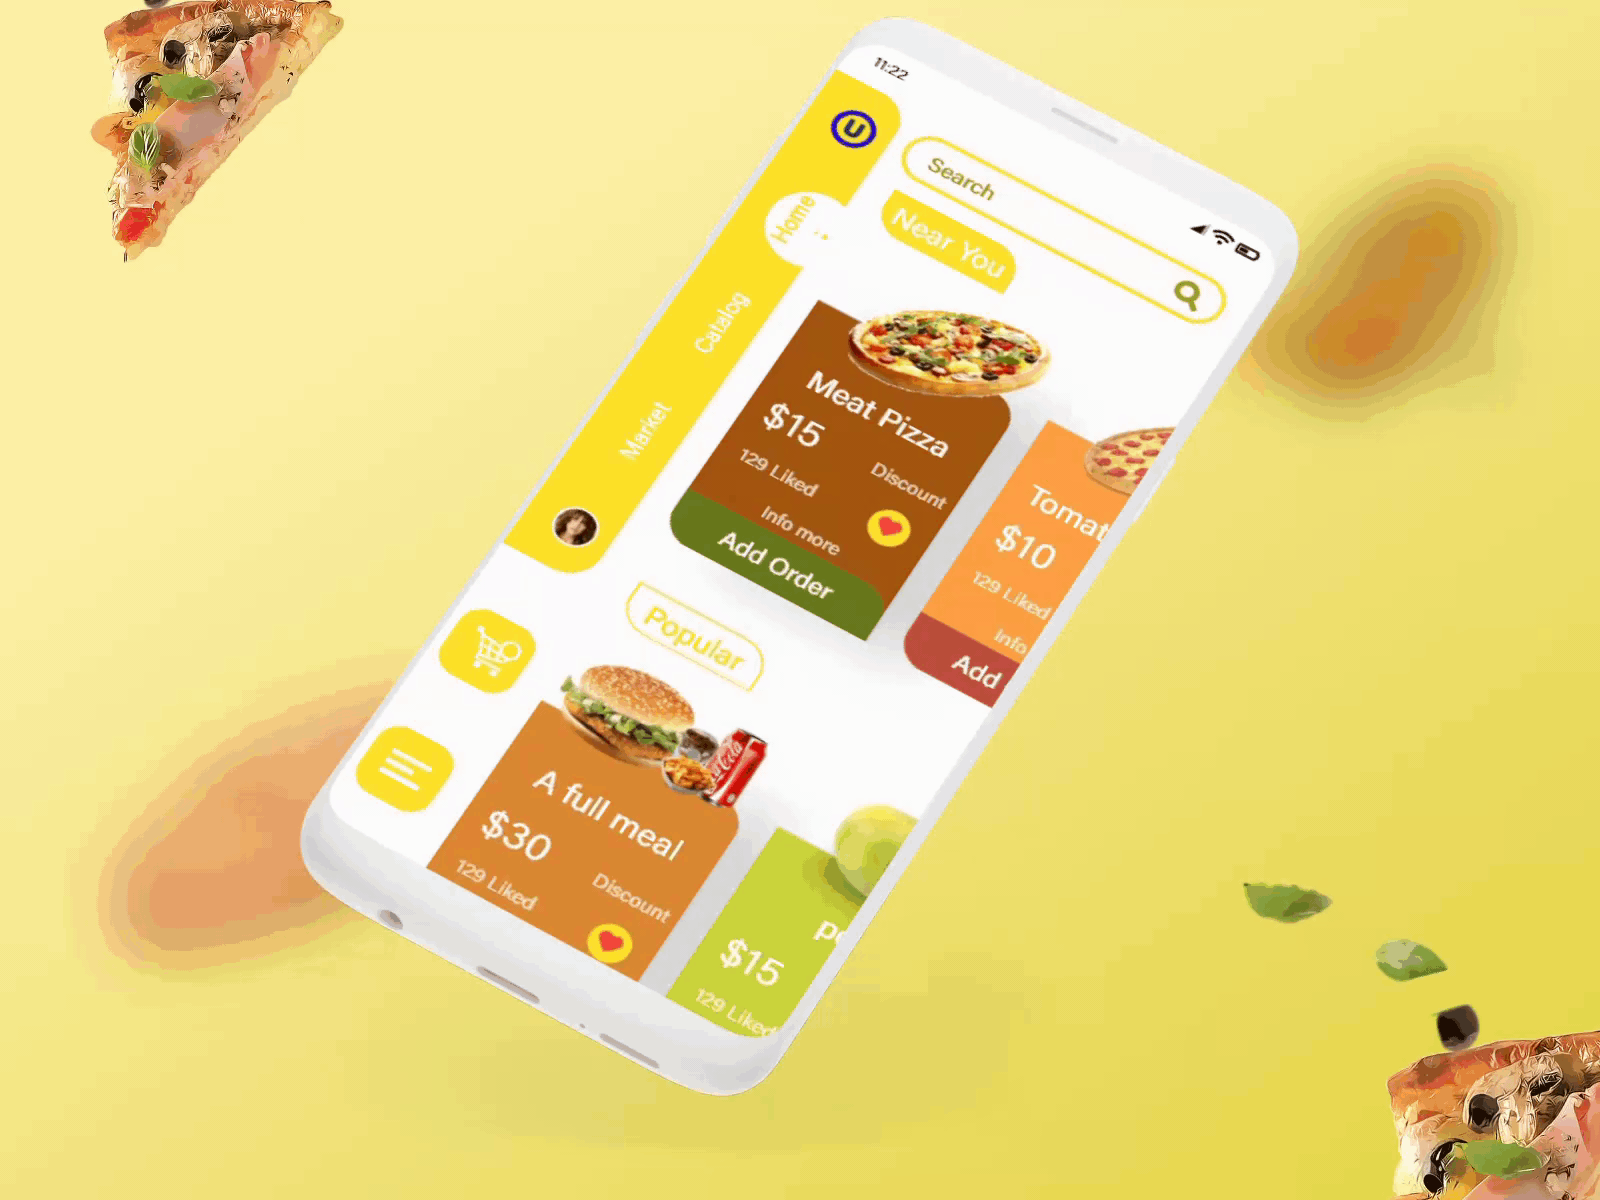 Food Delivery App (Animation) adobexd animation app app design design food app interaction interaction design interactive prototype ui ux ui design uidesign uiux user experience user interface design userinterface ux uxdesign uxui